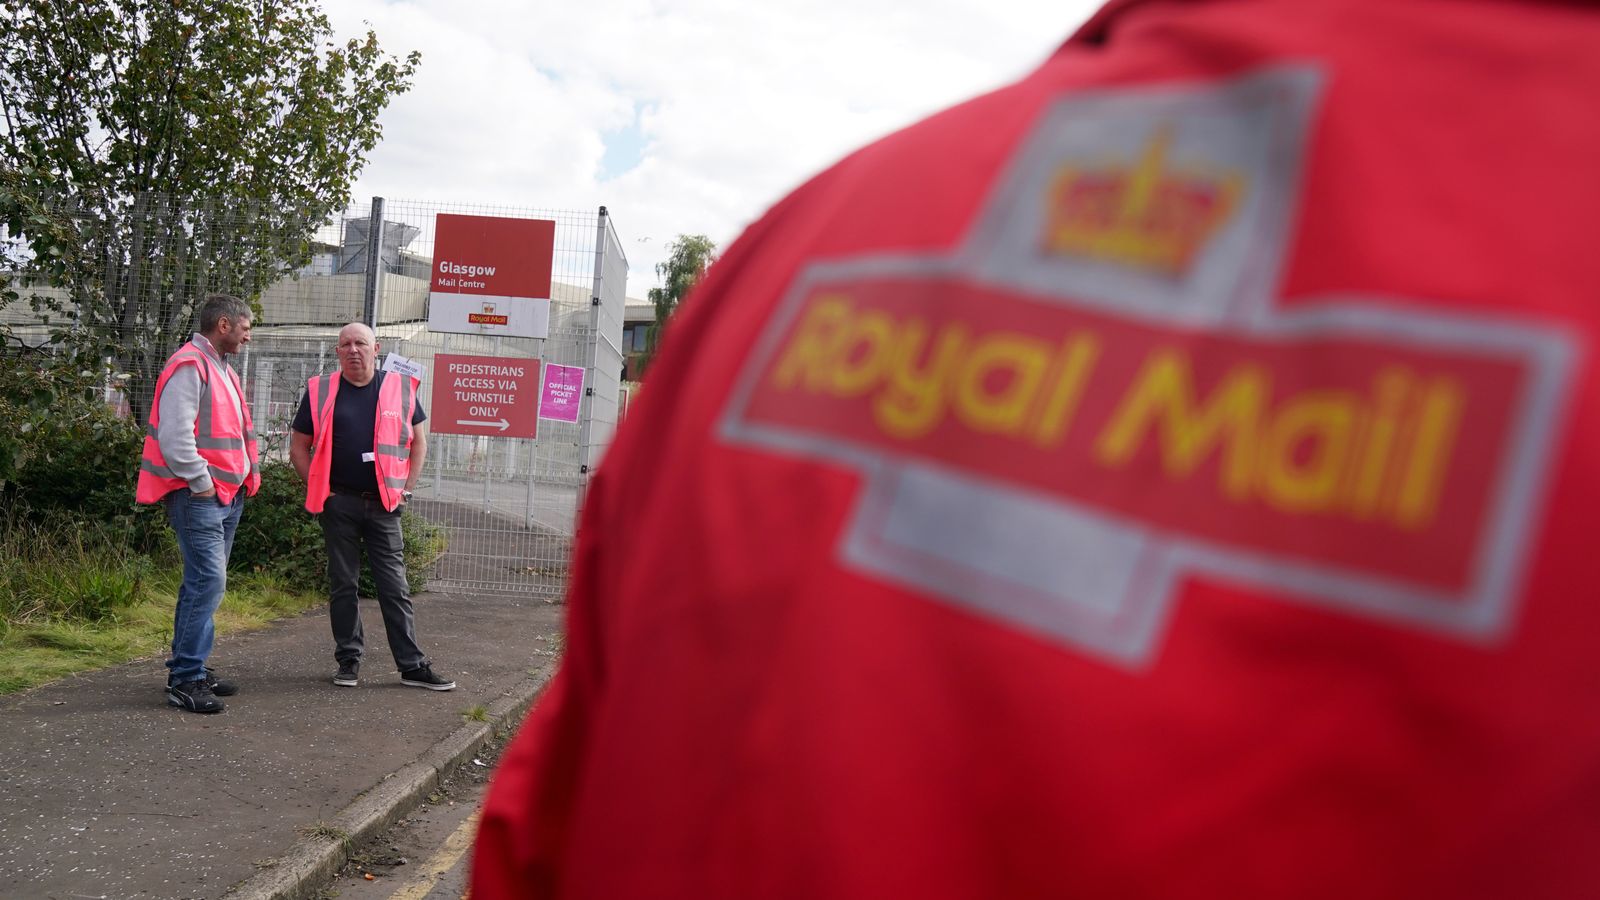 Royal Mail seeks to reduce letter deliveries as strikes plunge parent firm to first half loss